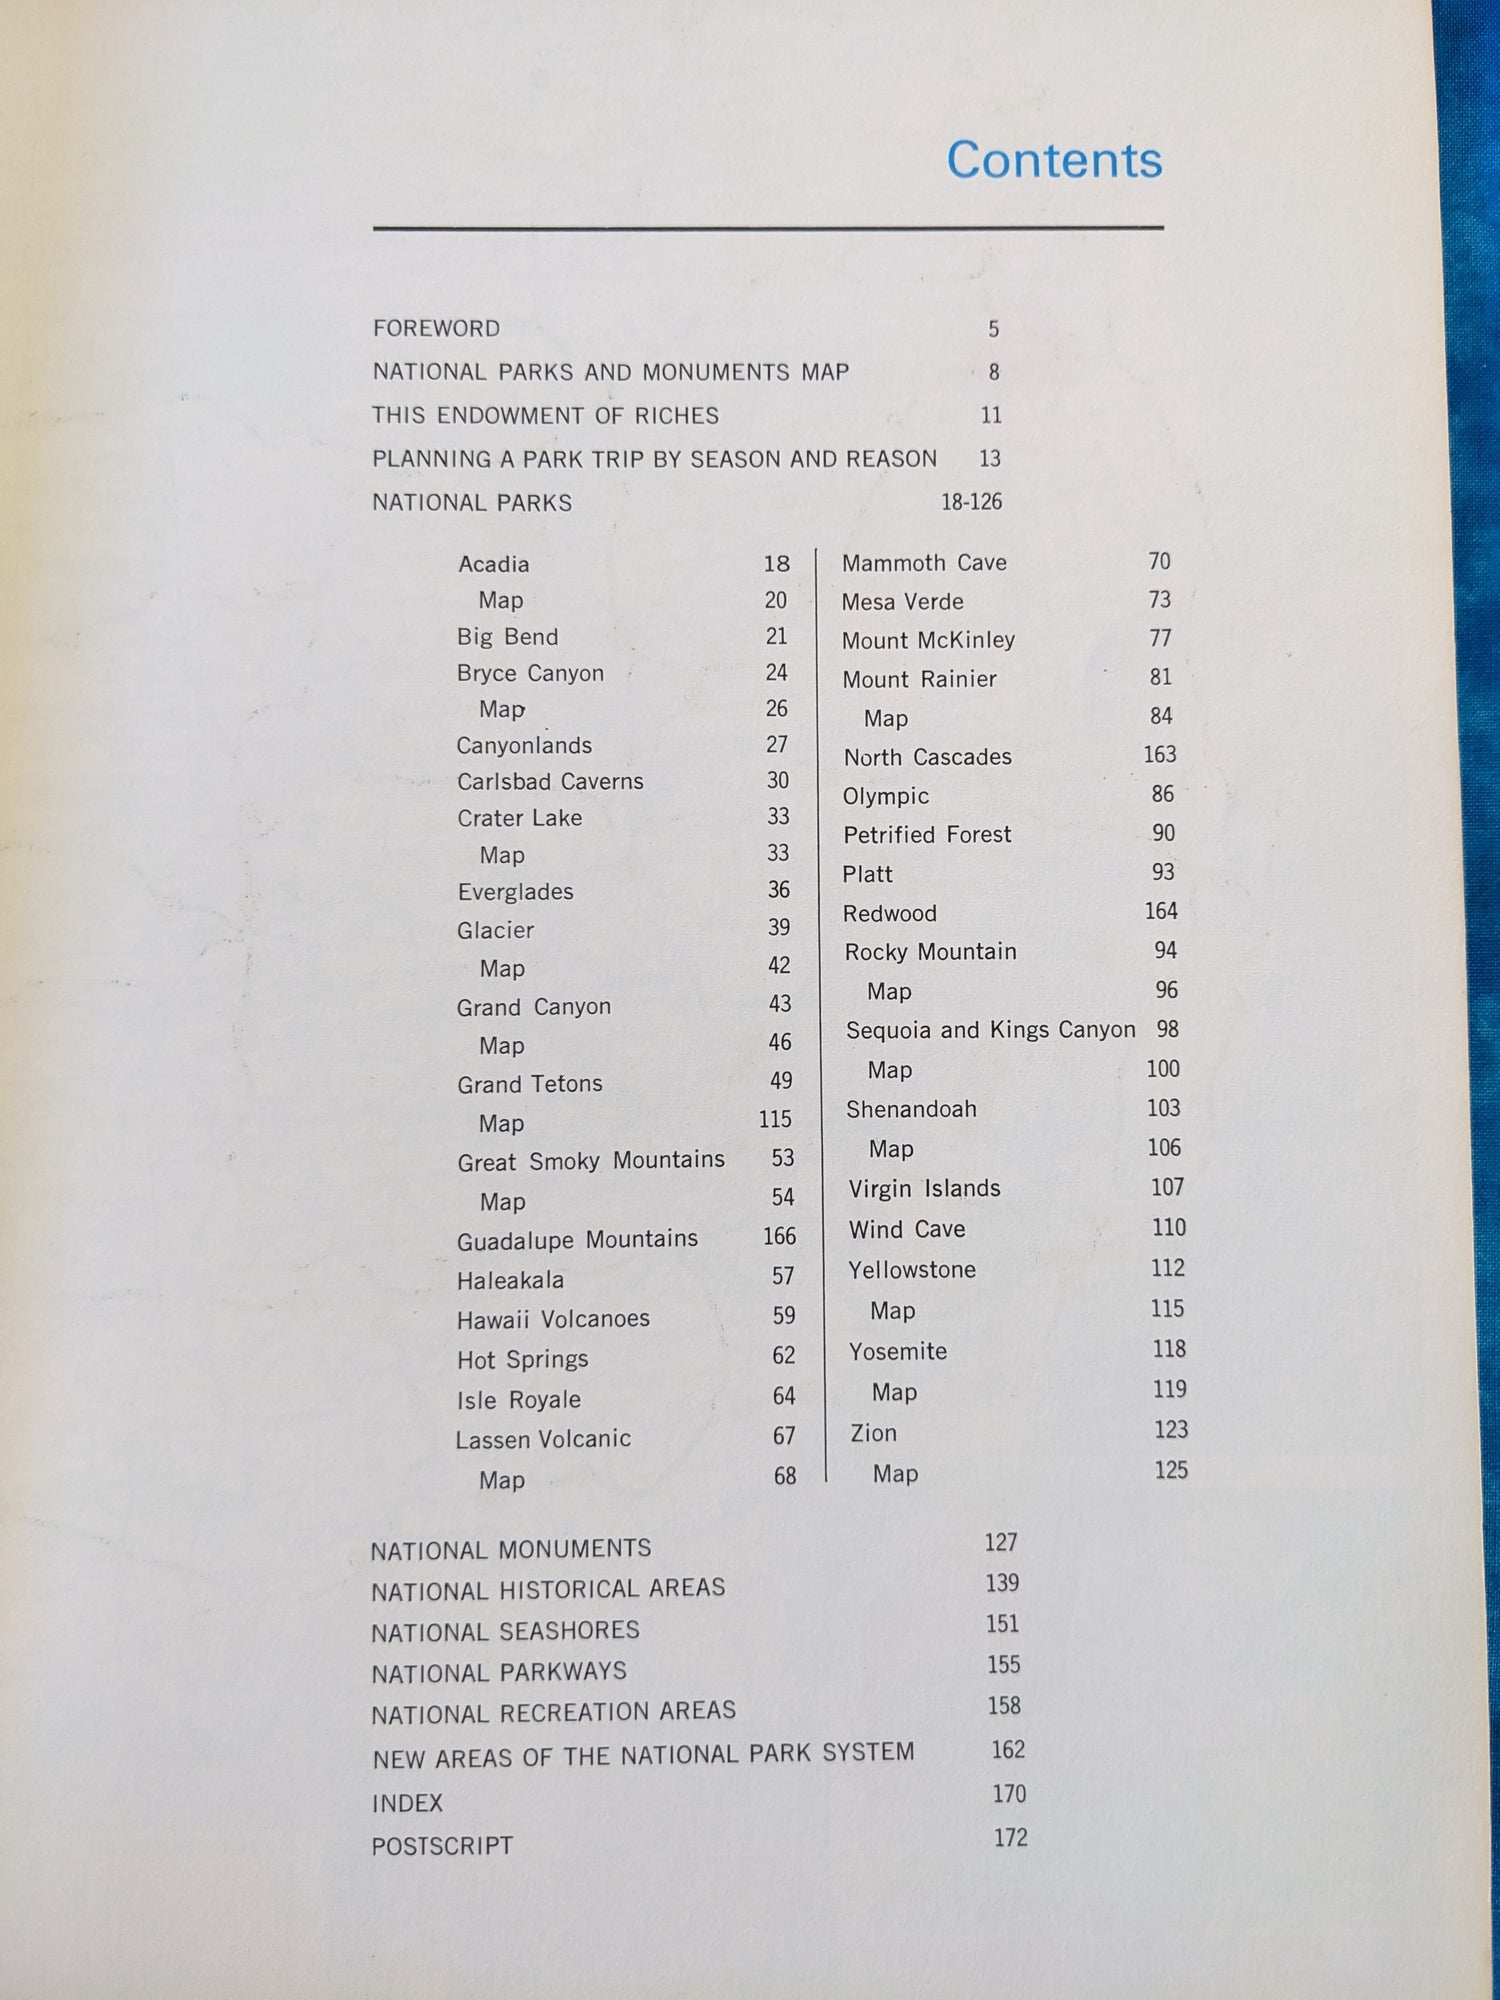 Rand McNally National Park Guide vintage book contents page